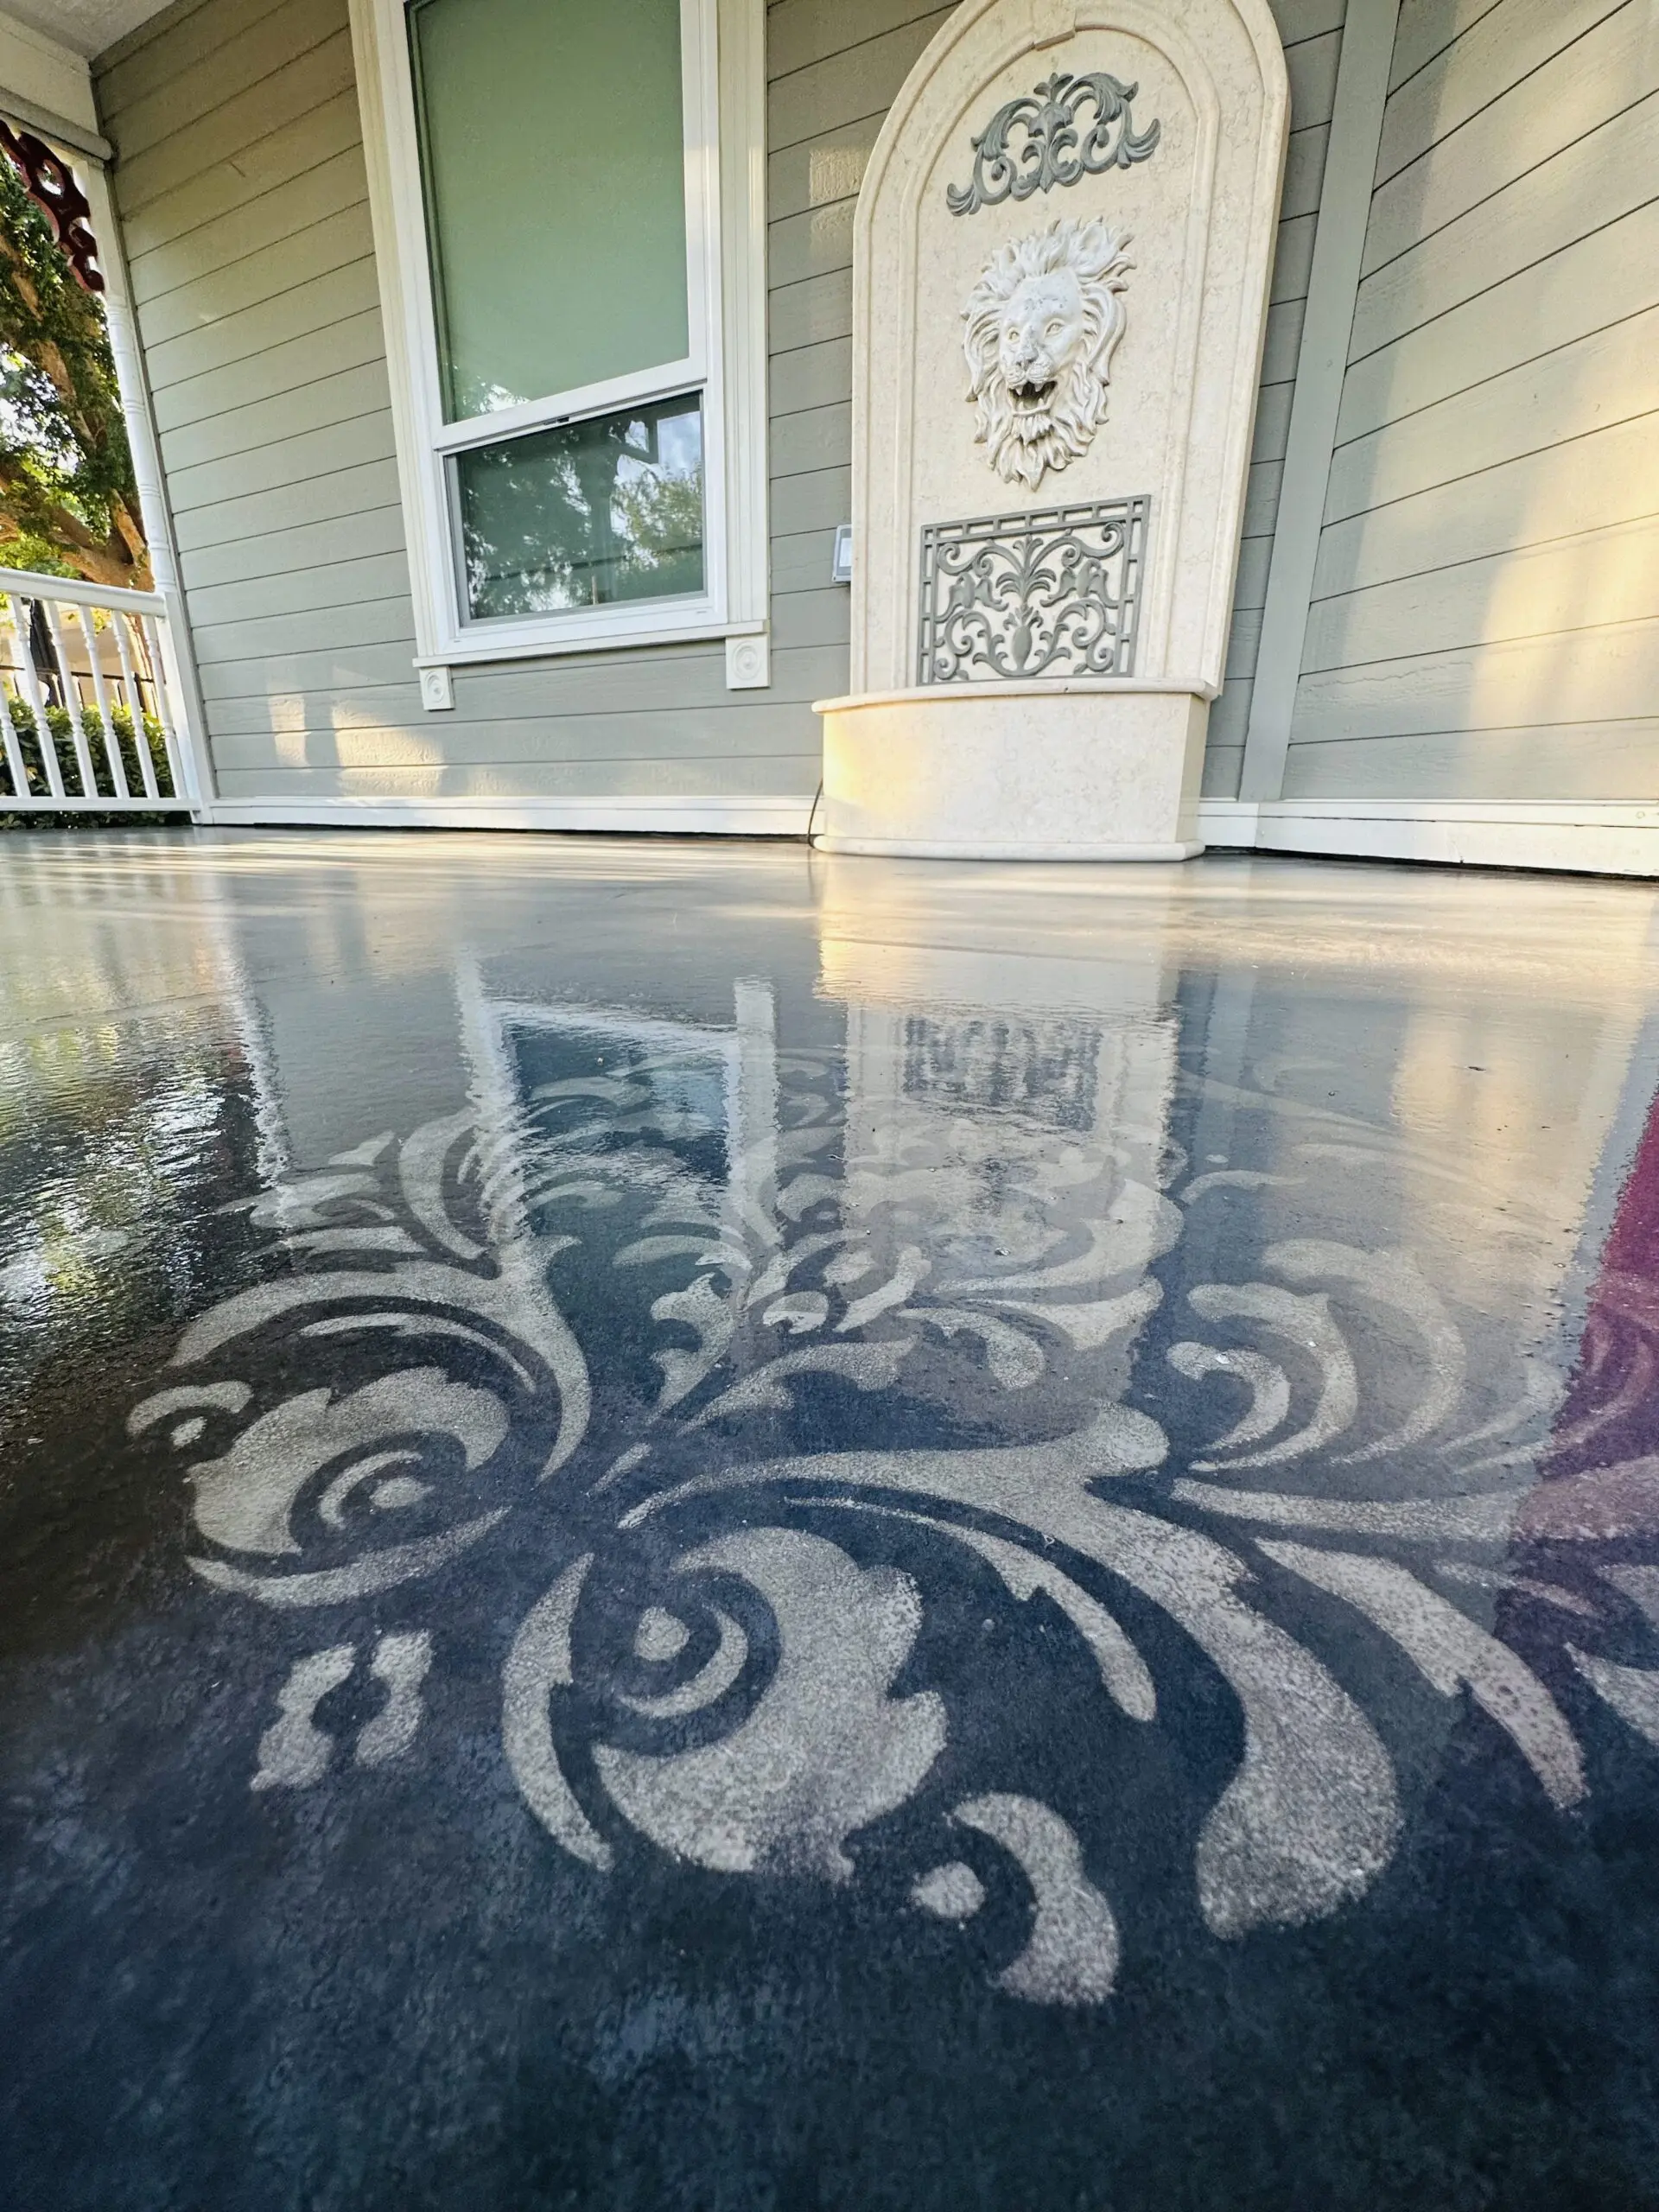 Finished concrete floor with a sophisticated Damask stencil design